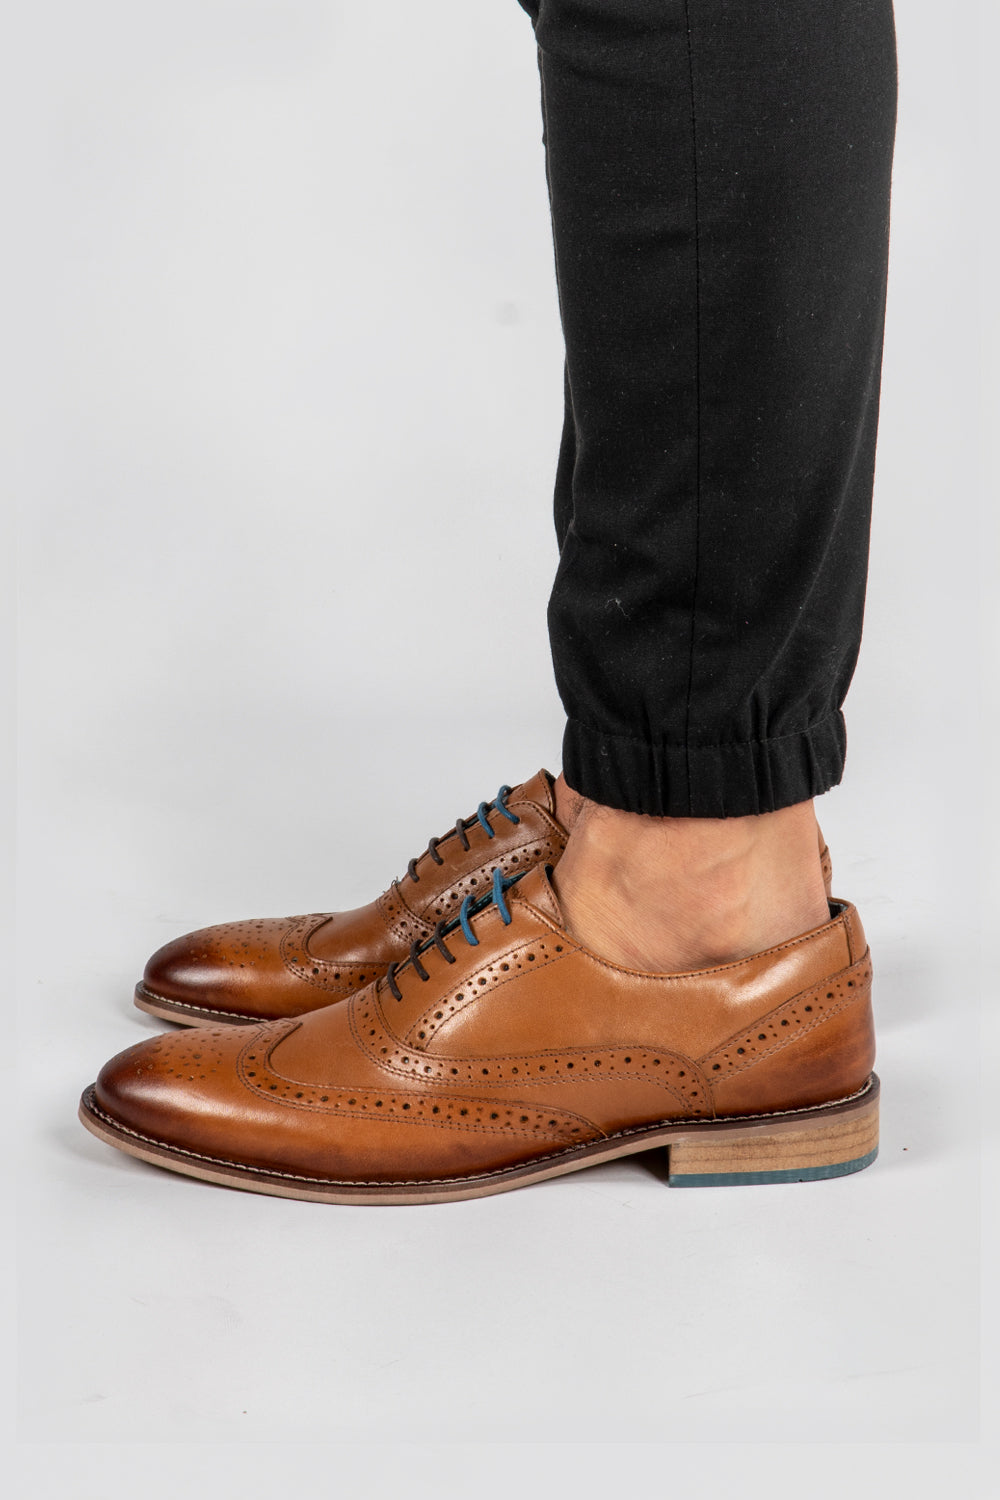 Man wearing tan leather brogue shoes Winston tan brogue wingtip oxford shoes for men by oswin hyde